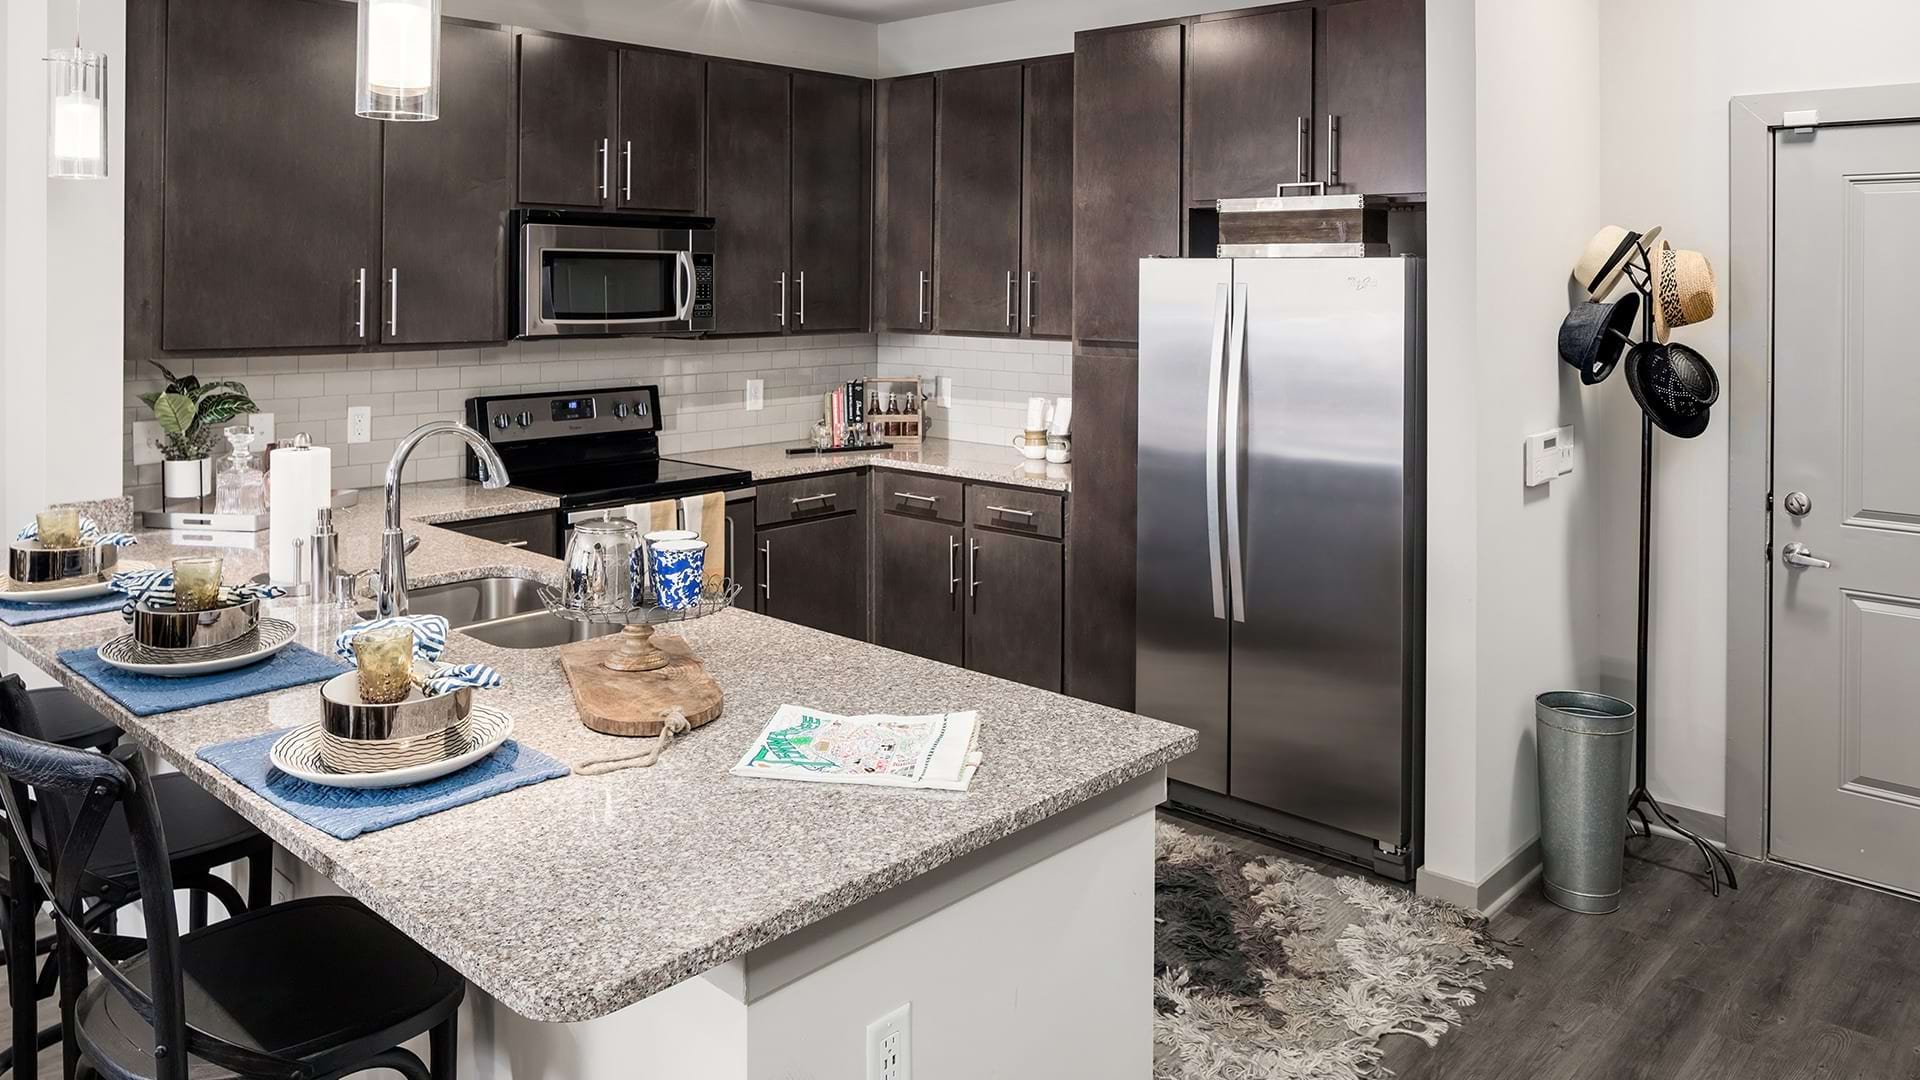 Kitchen with Granite Countertops at Our Bellevue Apartments for Rent